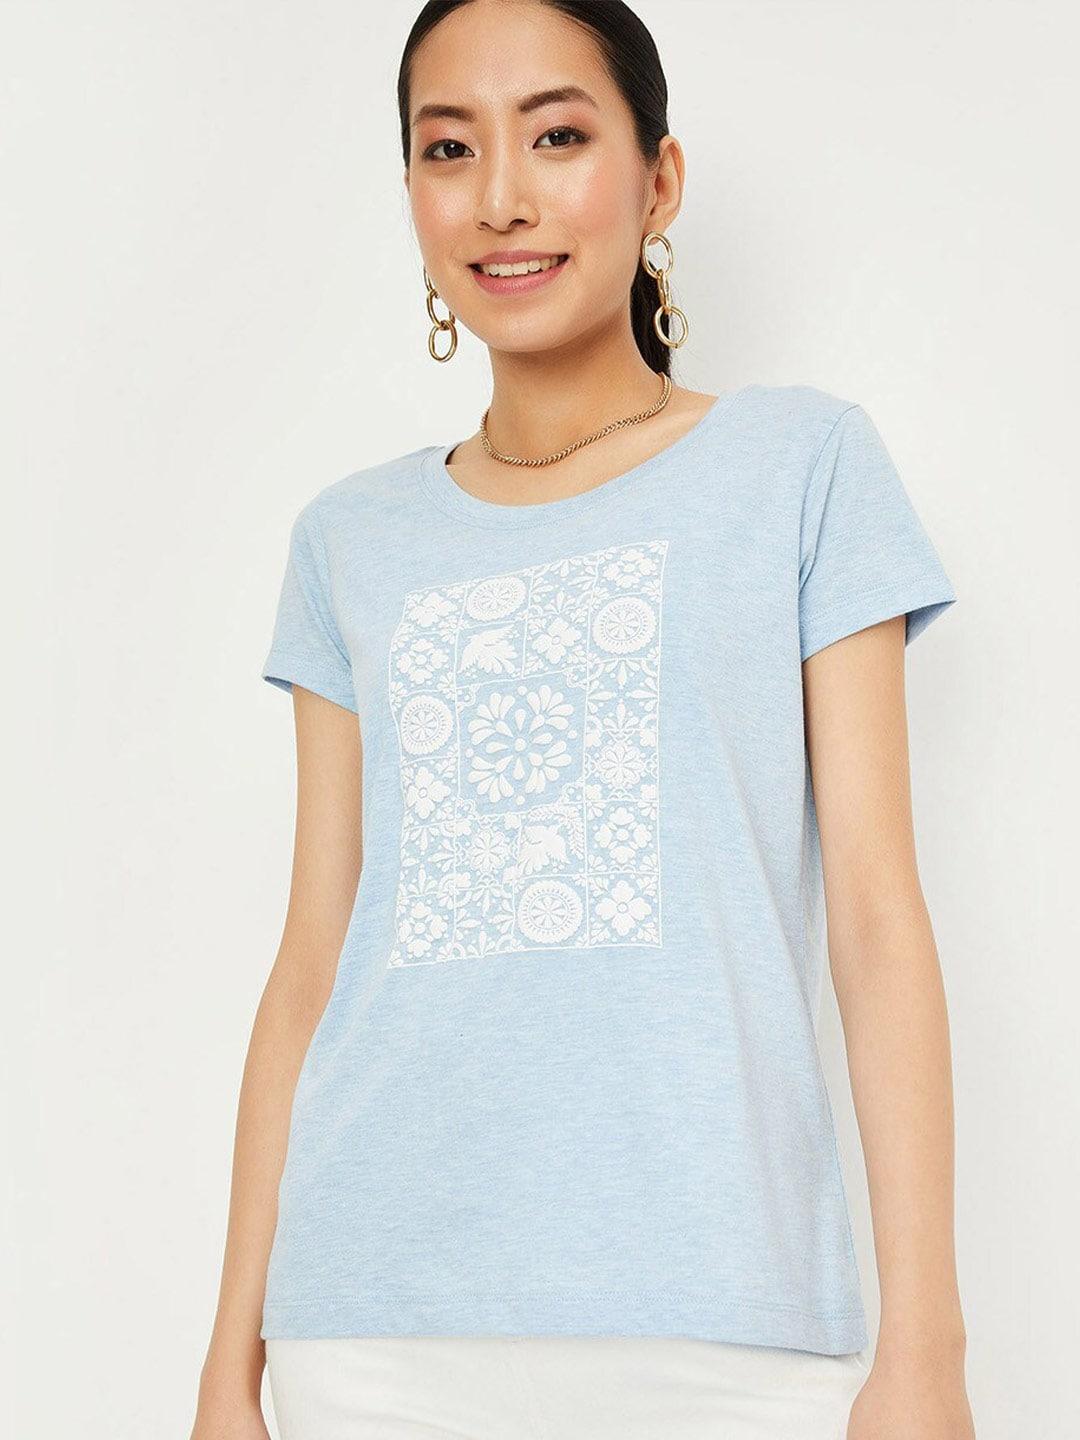 max-graphic-printed-pure-cotton-t-shirt